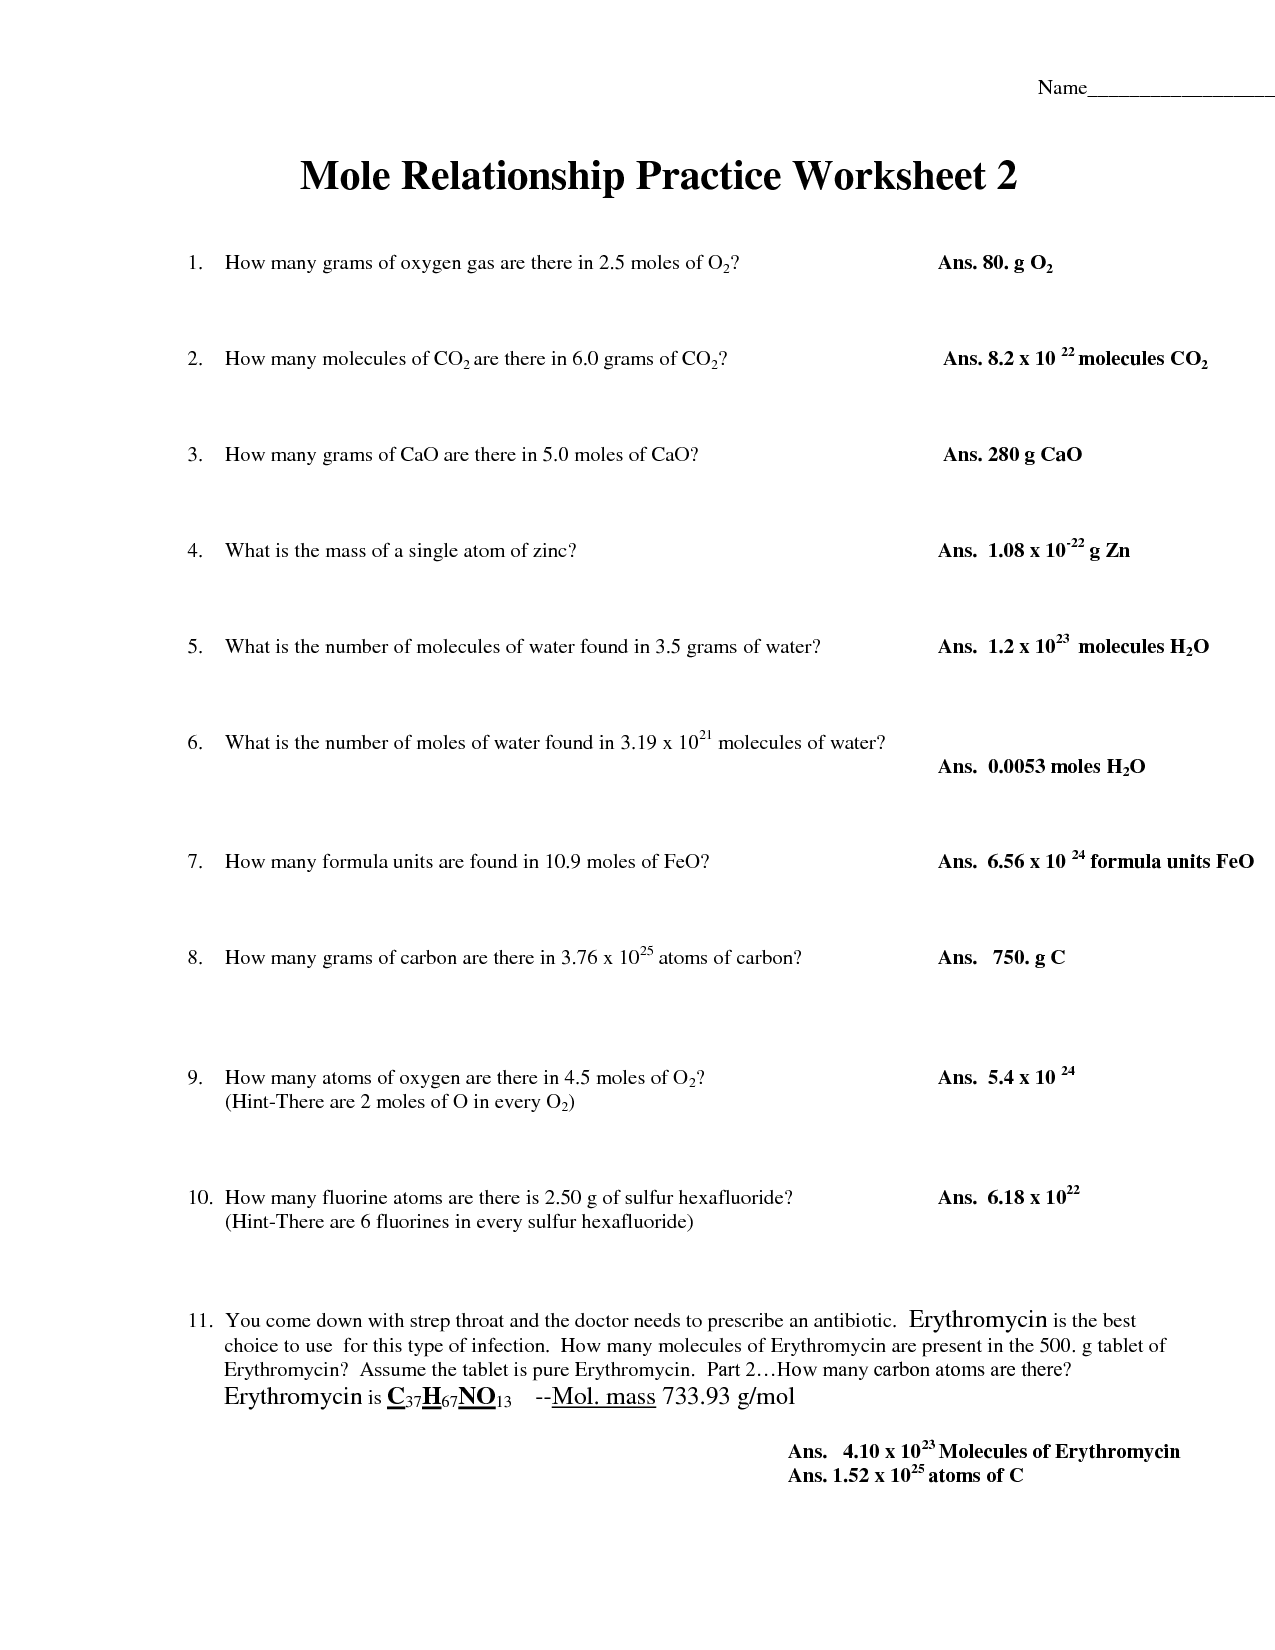 mole-particle-conversions-worksheet-answers